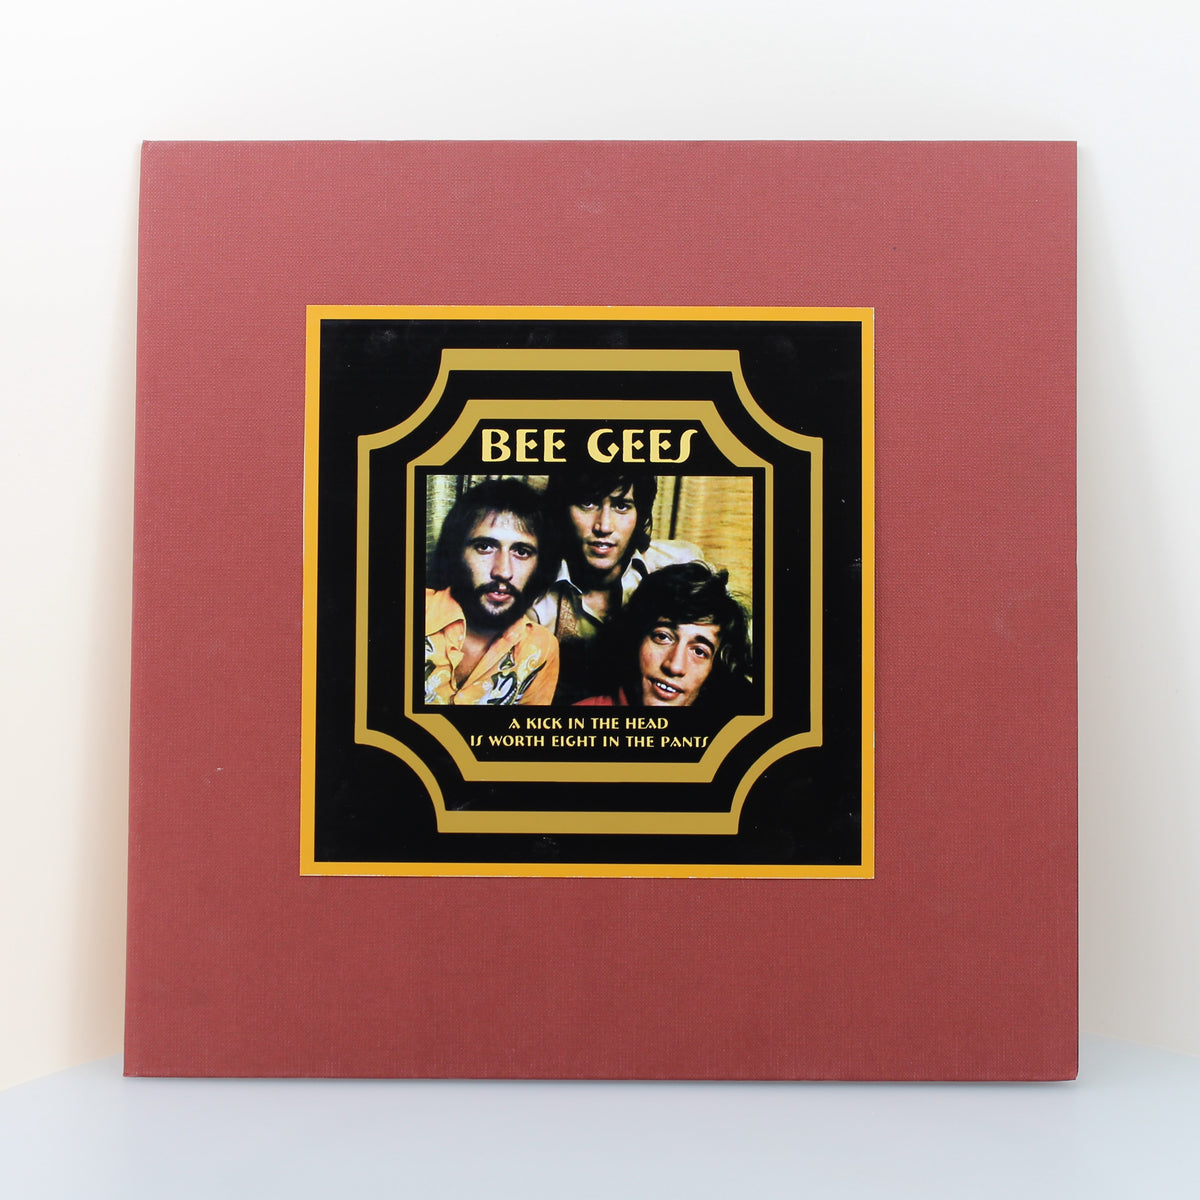 Bee Gees - A Kick In The Head Is Worth Eight In The Pants, 2x Vinyl LP 33Rpm Test Pressing, Malaysia